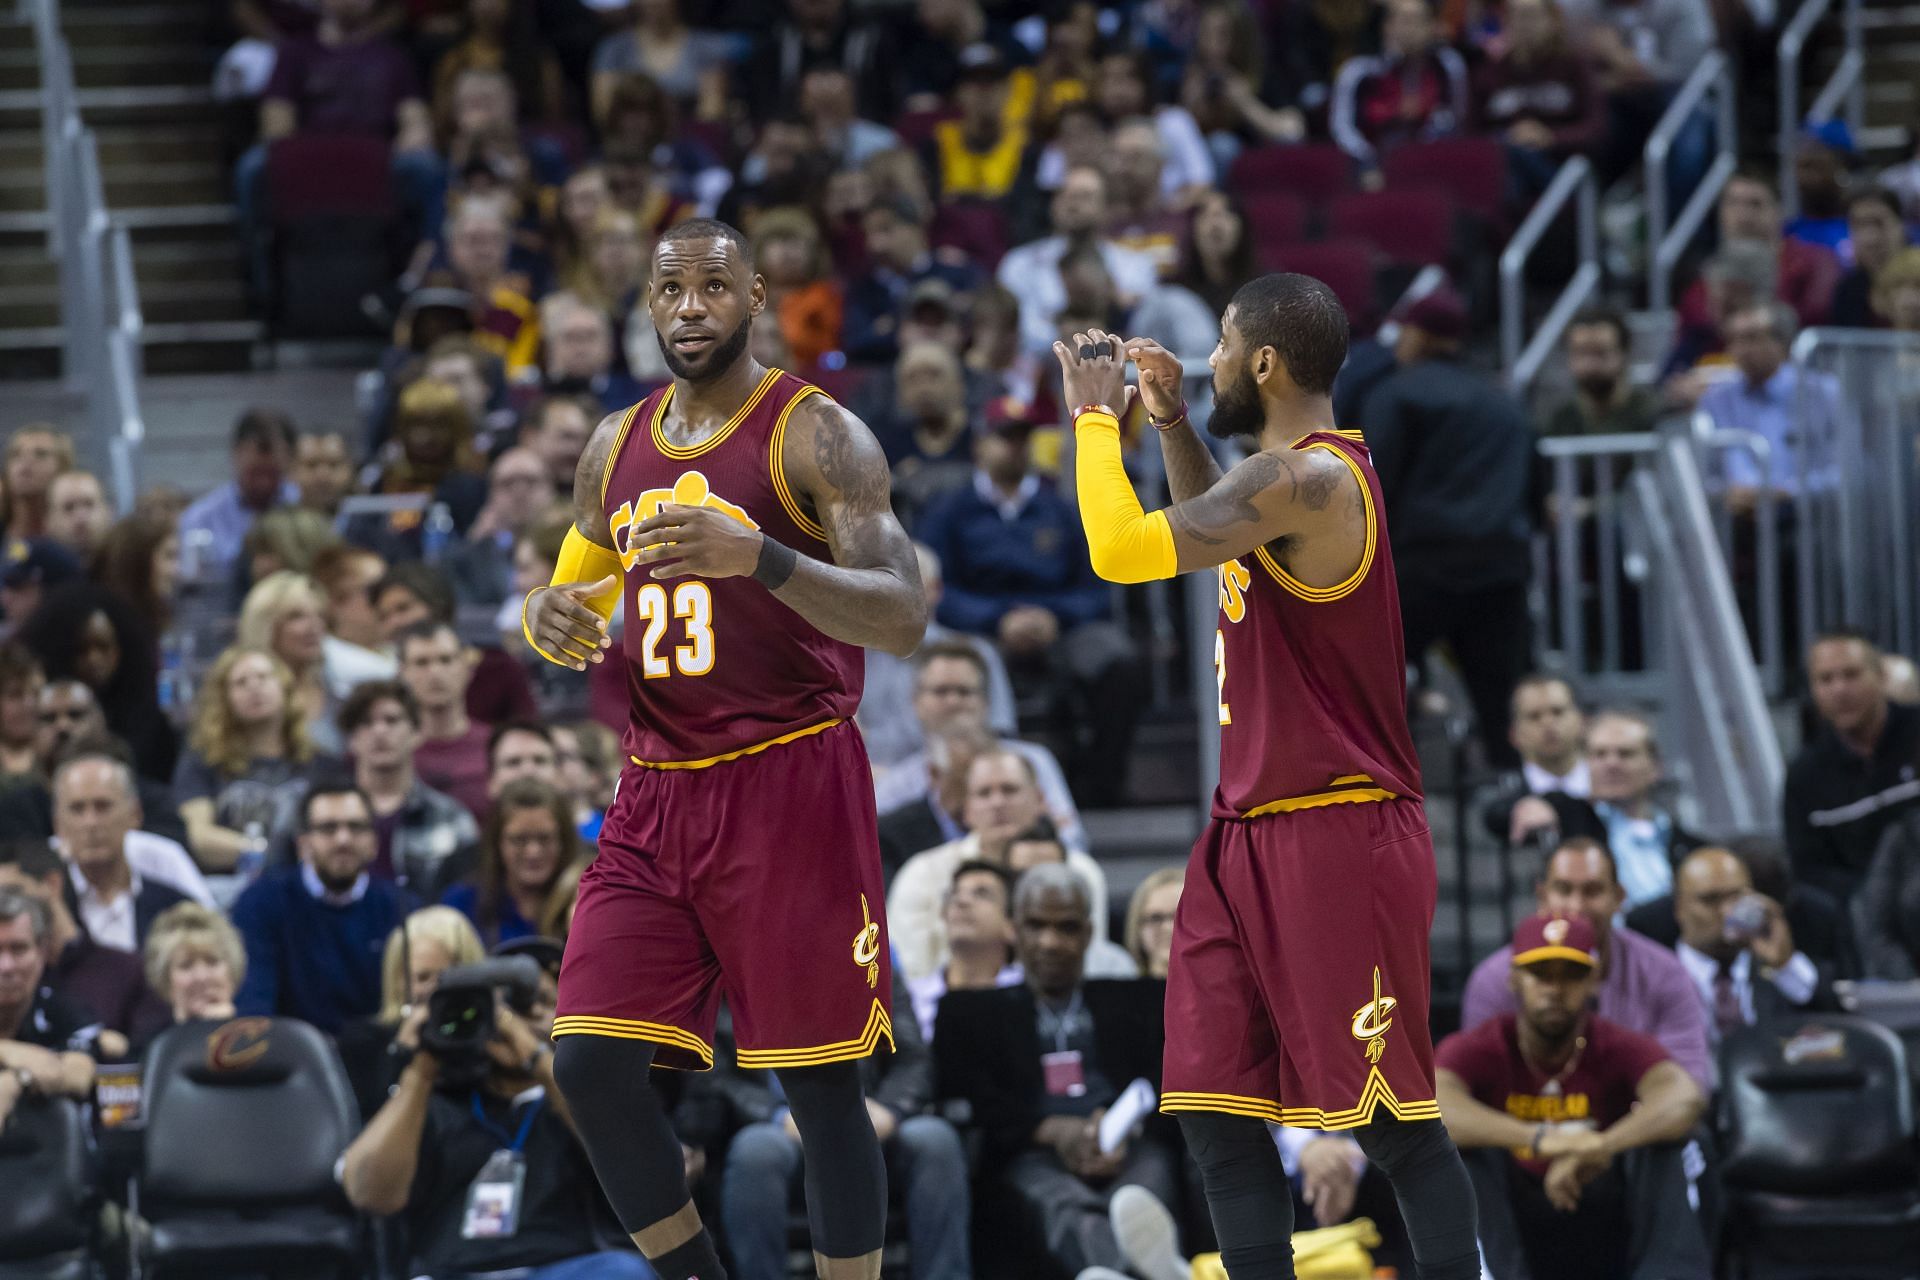 LeBron James and Kyrie Irving share the floor for the Cleveland Cavaliers.